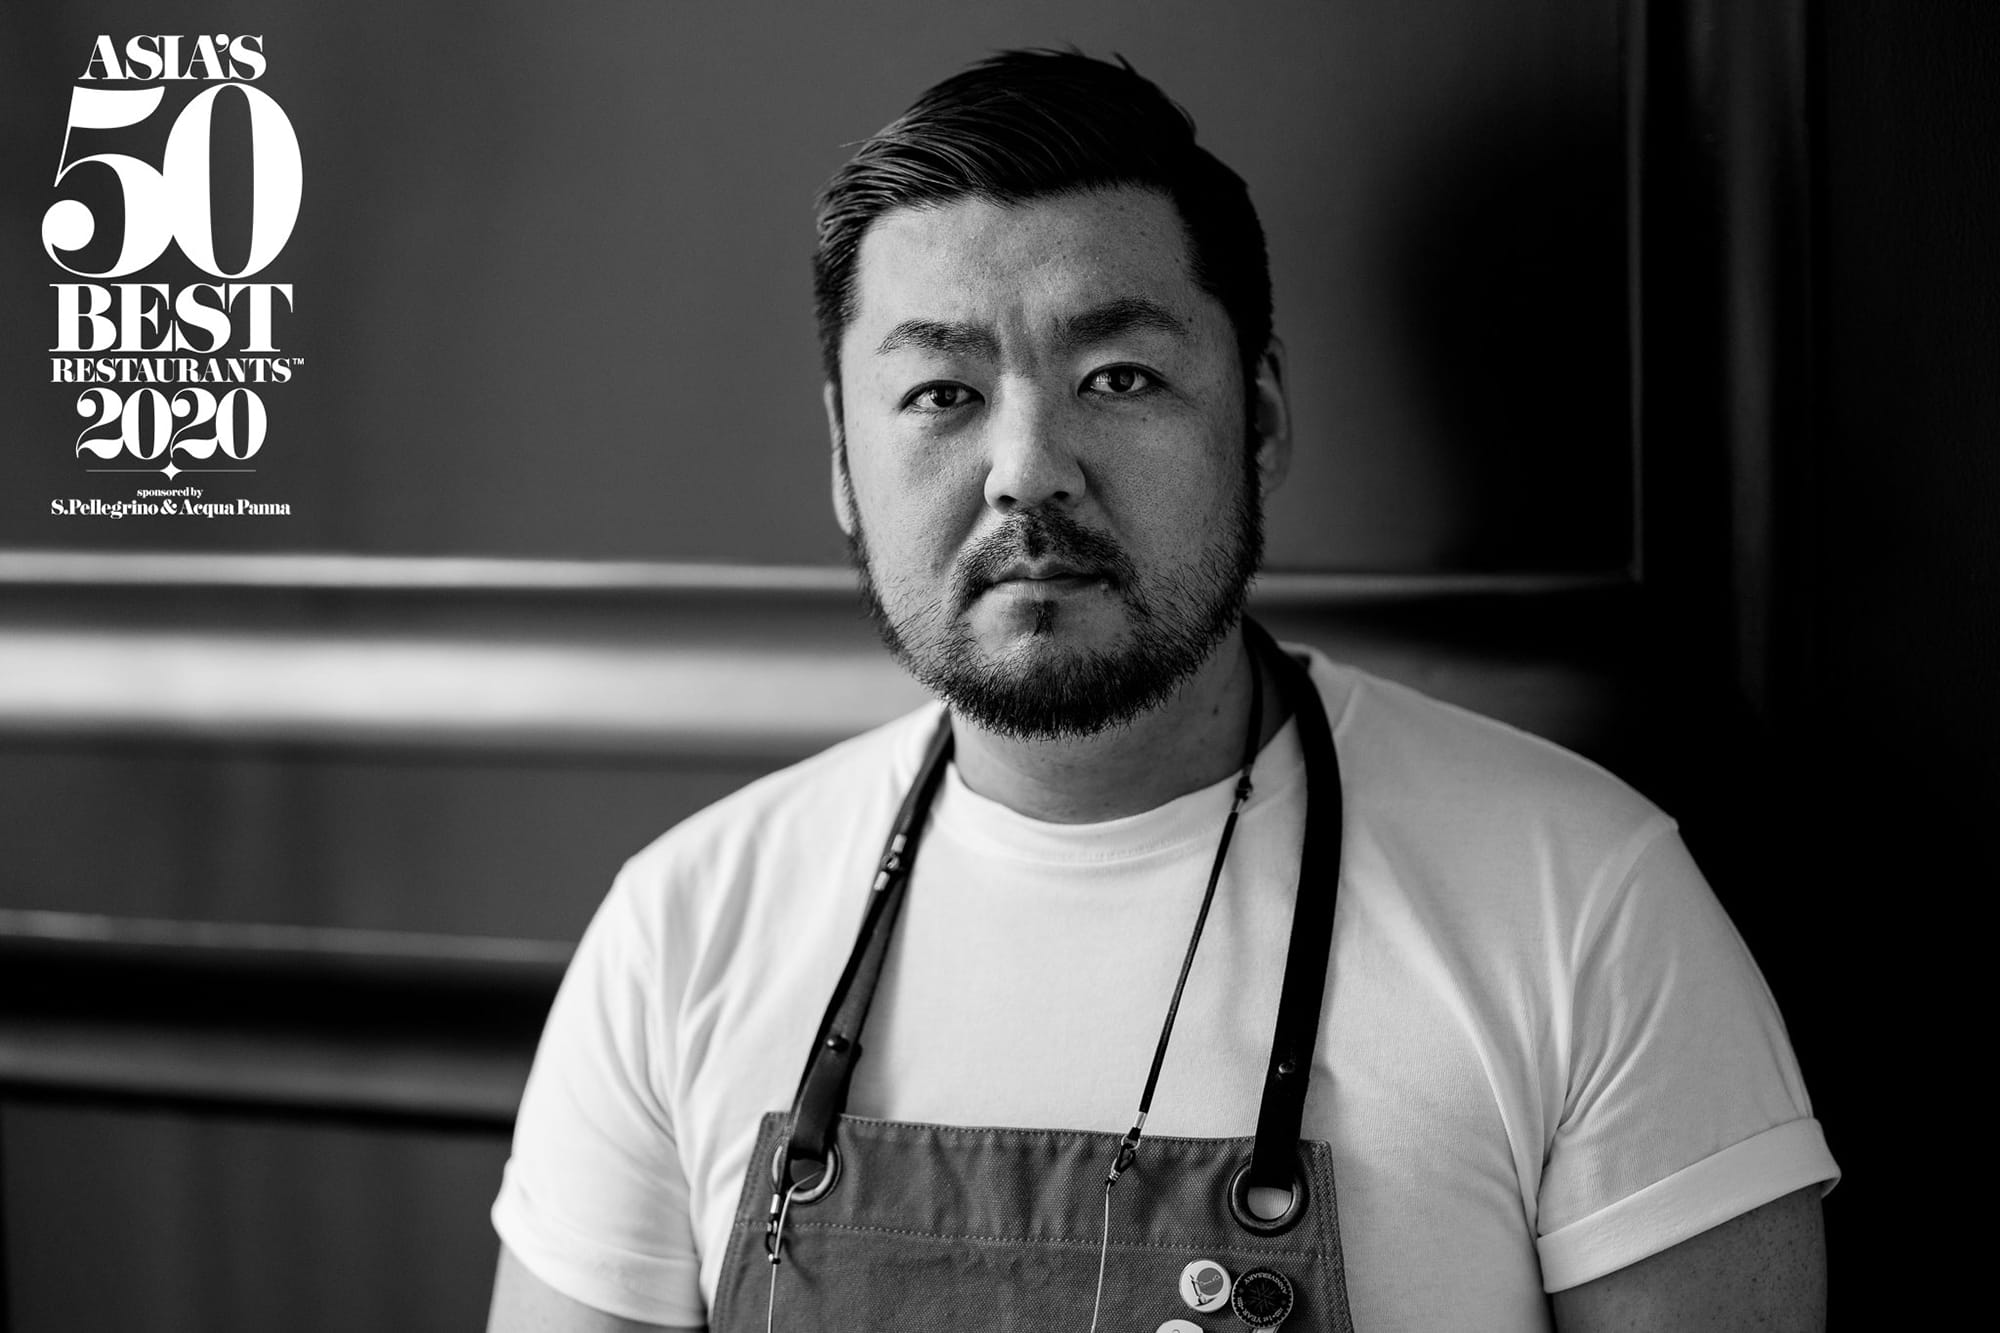 La Cime was ranked as 17th place in 2018, the restaurant climbed up to become 14th place the following year, and this year the restaurant has reached 10th place. Yusuke Takada, head chef of La Cime, said, “The Chefs’ Choice Award is a proof that my chef peers have supported me. This makes me even happier than the result of the rankings”.